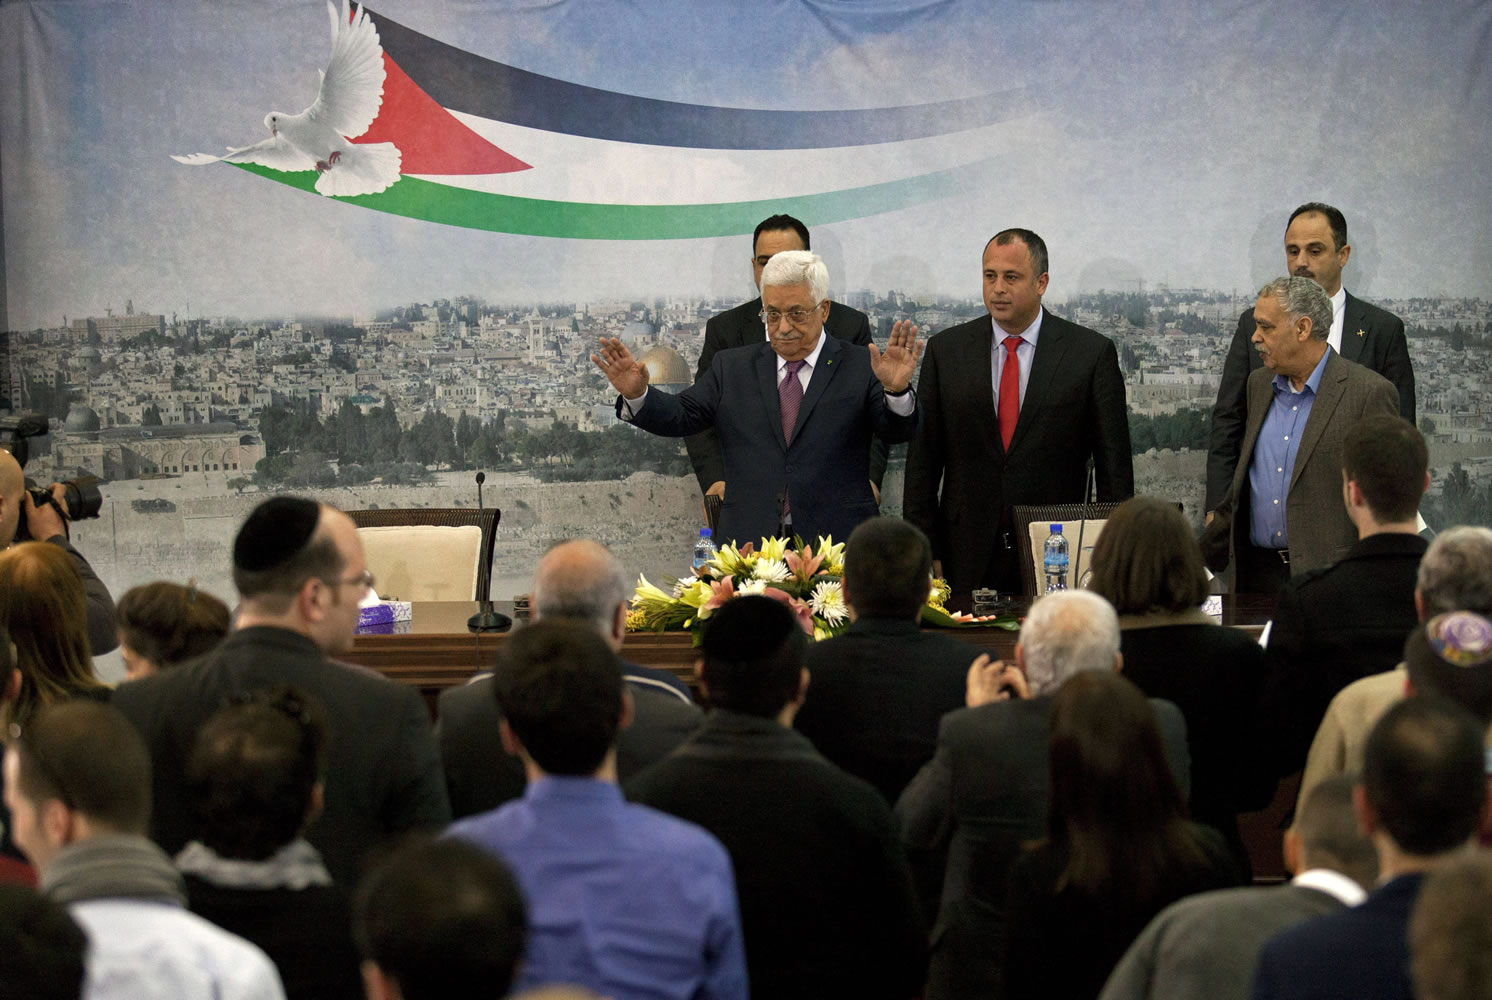 Palestinian President Mahmoud Abbas, top left, and Israeli Labor party lawmaker Hilik Bar, top second from left, arrive for a meeting Sunday with a delegation of mostly Israeli university students and activists in dovish political parties, at his compound in the West Bank city of Ramallah.